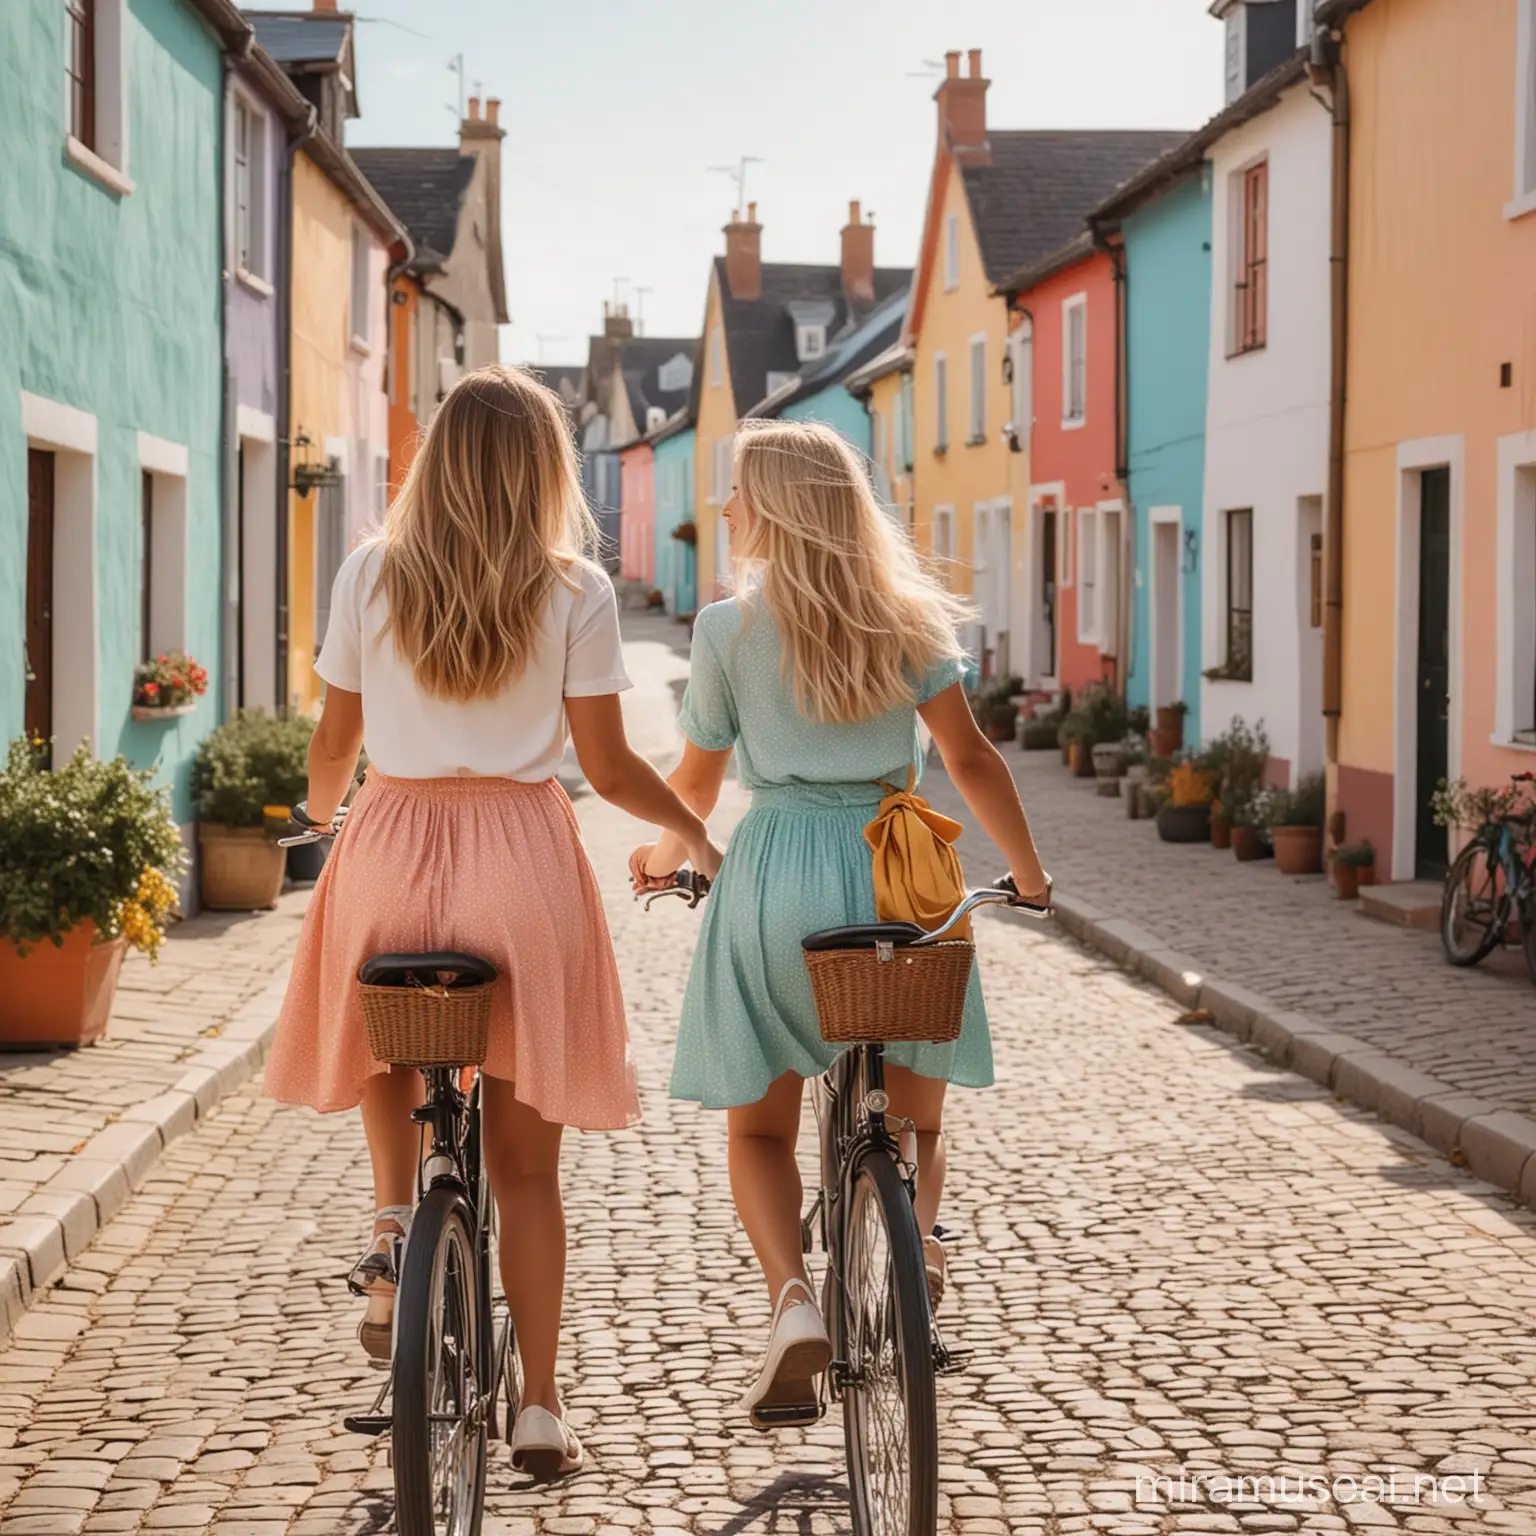 Create a picture of two girls with short blonde ombre hair sharing a bicycle ride through a quaint village street lined with colorful houses